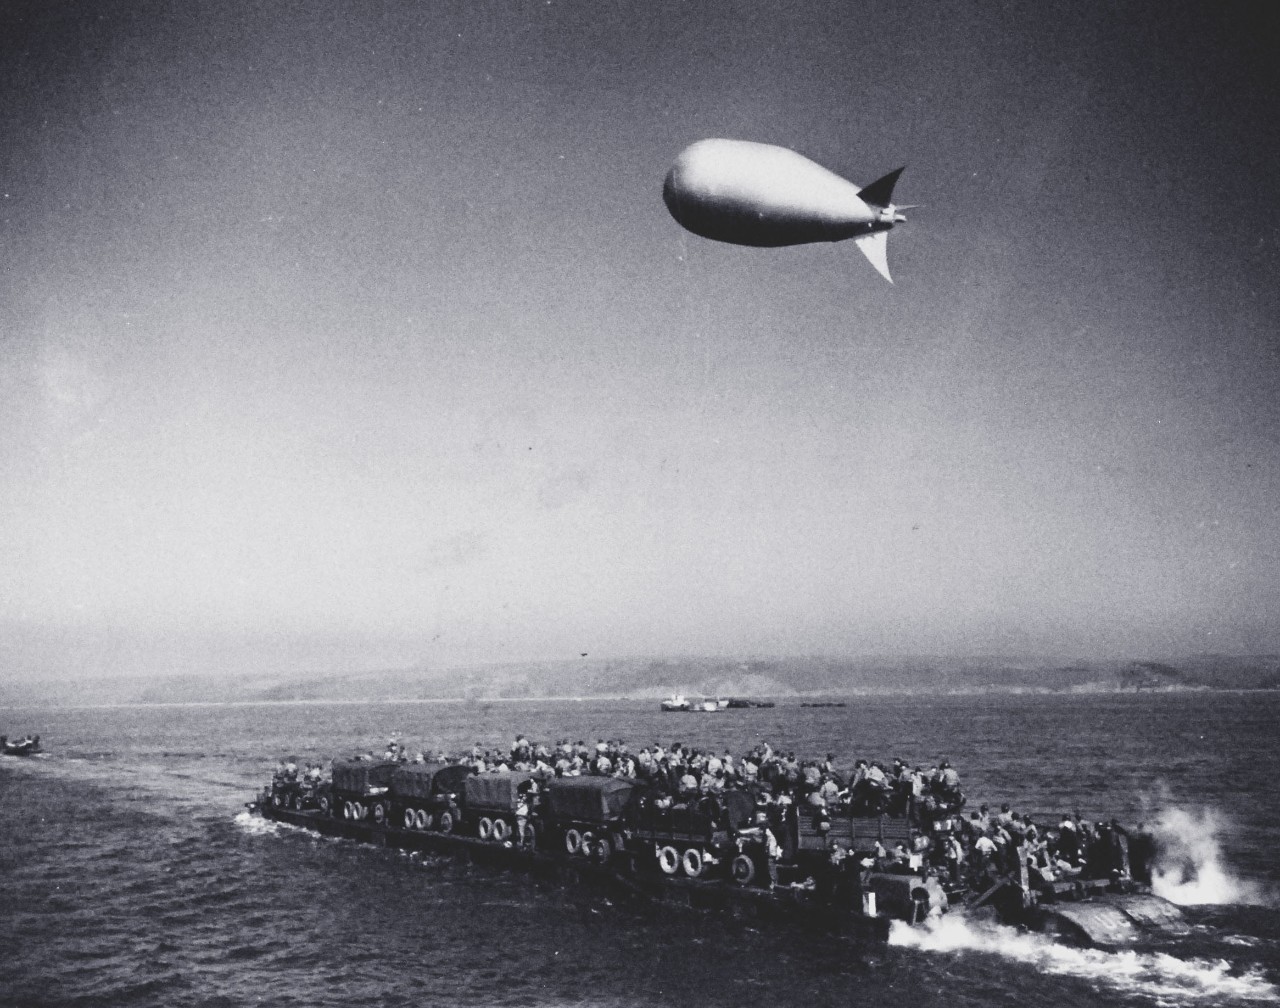 80-G-59405: Normany Invasion, Rhino Ferry, June 1944.      Normandy Invasion, June 1944.  Rhino ferry RHF-24, loaded with U.S. Army personnel and vehicles, undergoes tests off the English coast, prior to the Normandy invasion. Note the barrage balloon overhead.  Photograph released 10 June 1944, but taken well before that time.  Official U.S. Navy Photograph, now in the collections of the National Archives.    (2014/3/12).   